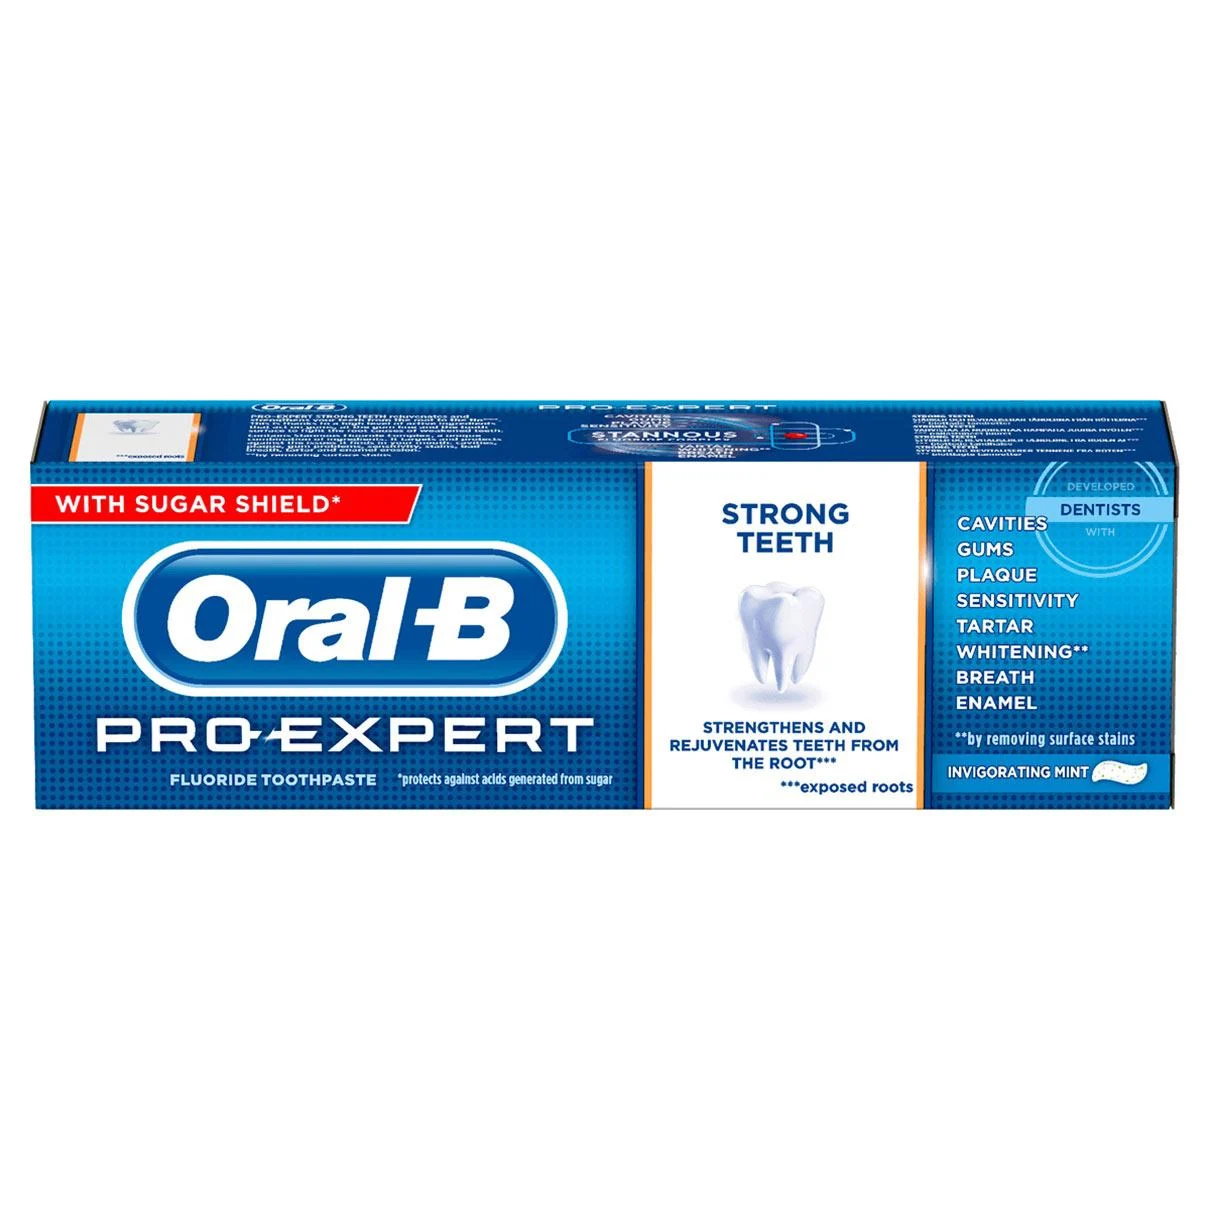 Oral-B Strong Teeth tandkräm undefined